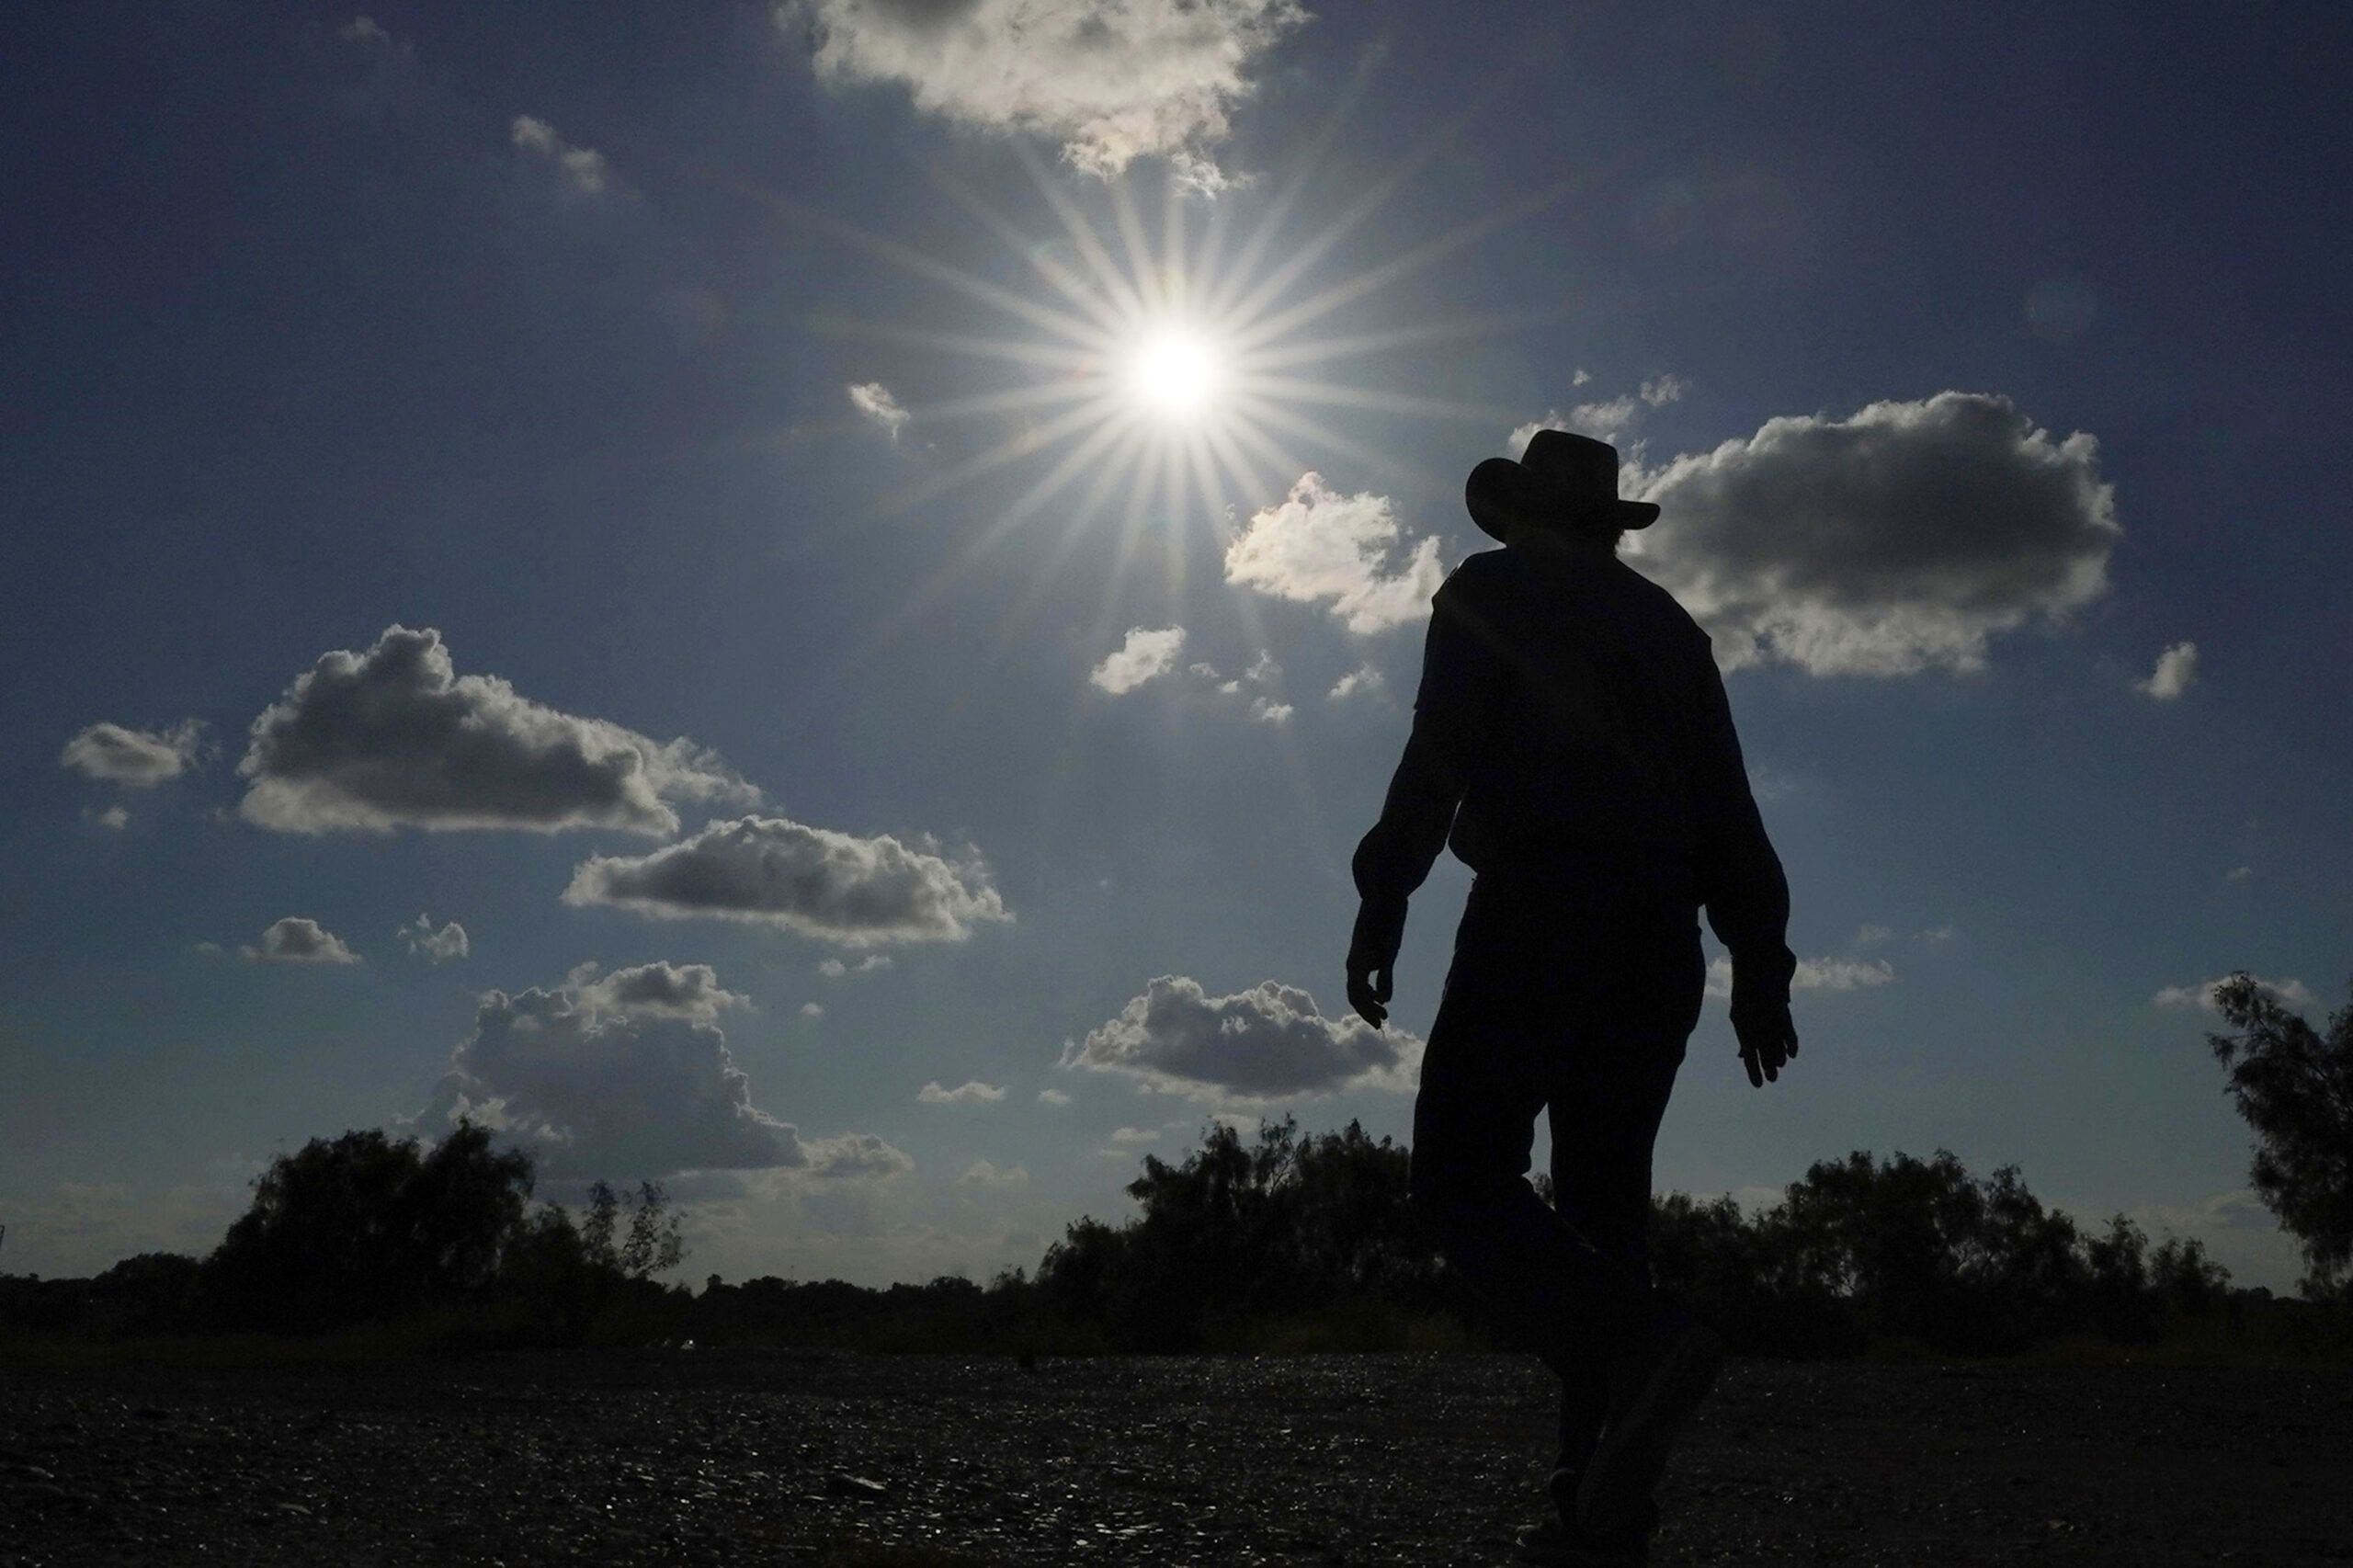 From Phoenix to Austin, Weeks of ‘Brutal’ Heat Stagger…